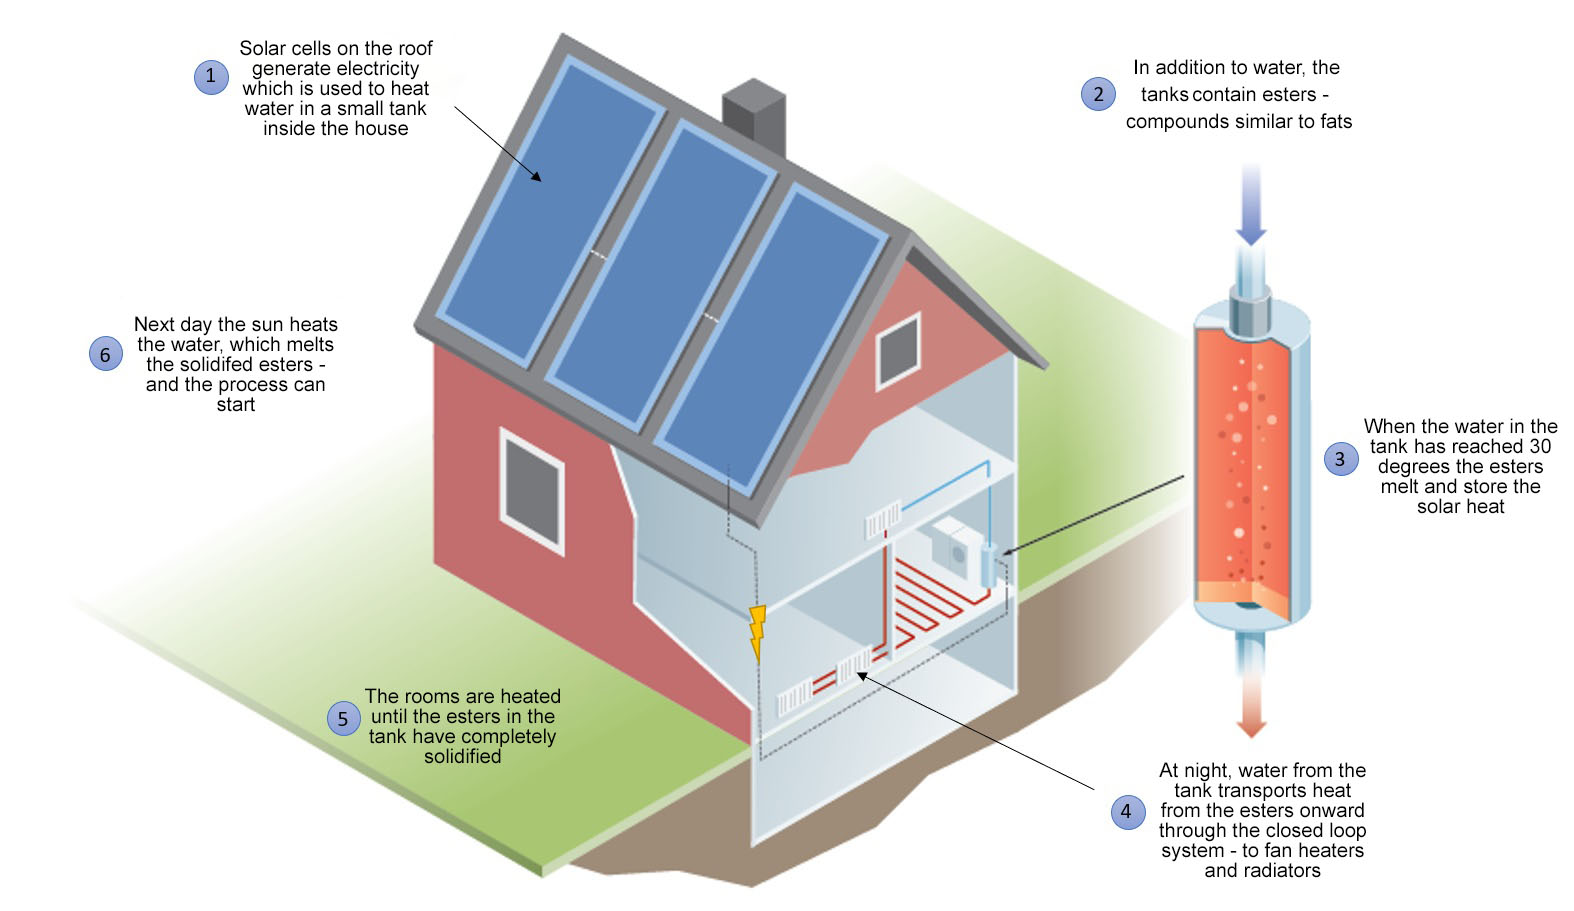 heating homes and holiday cabins on chilly nights – using solar energy and the components in fatty waste such as discarded food